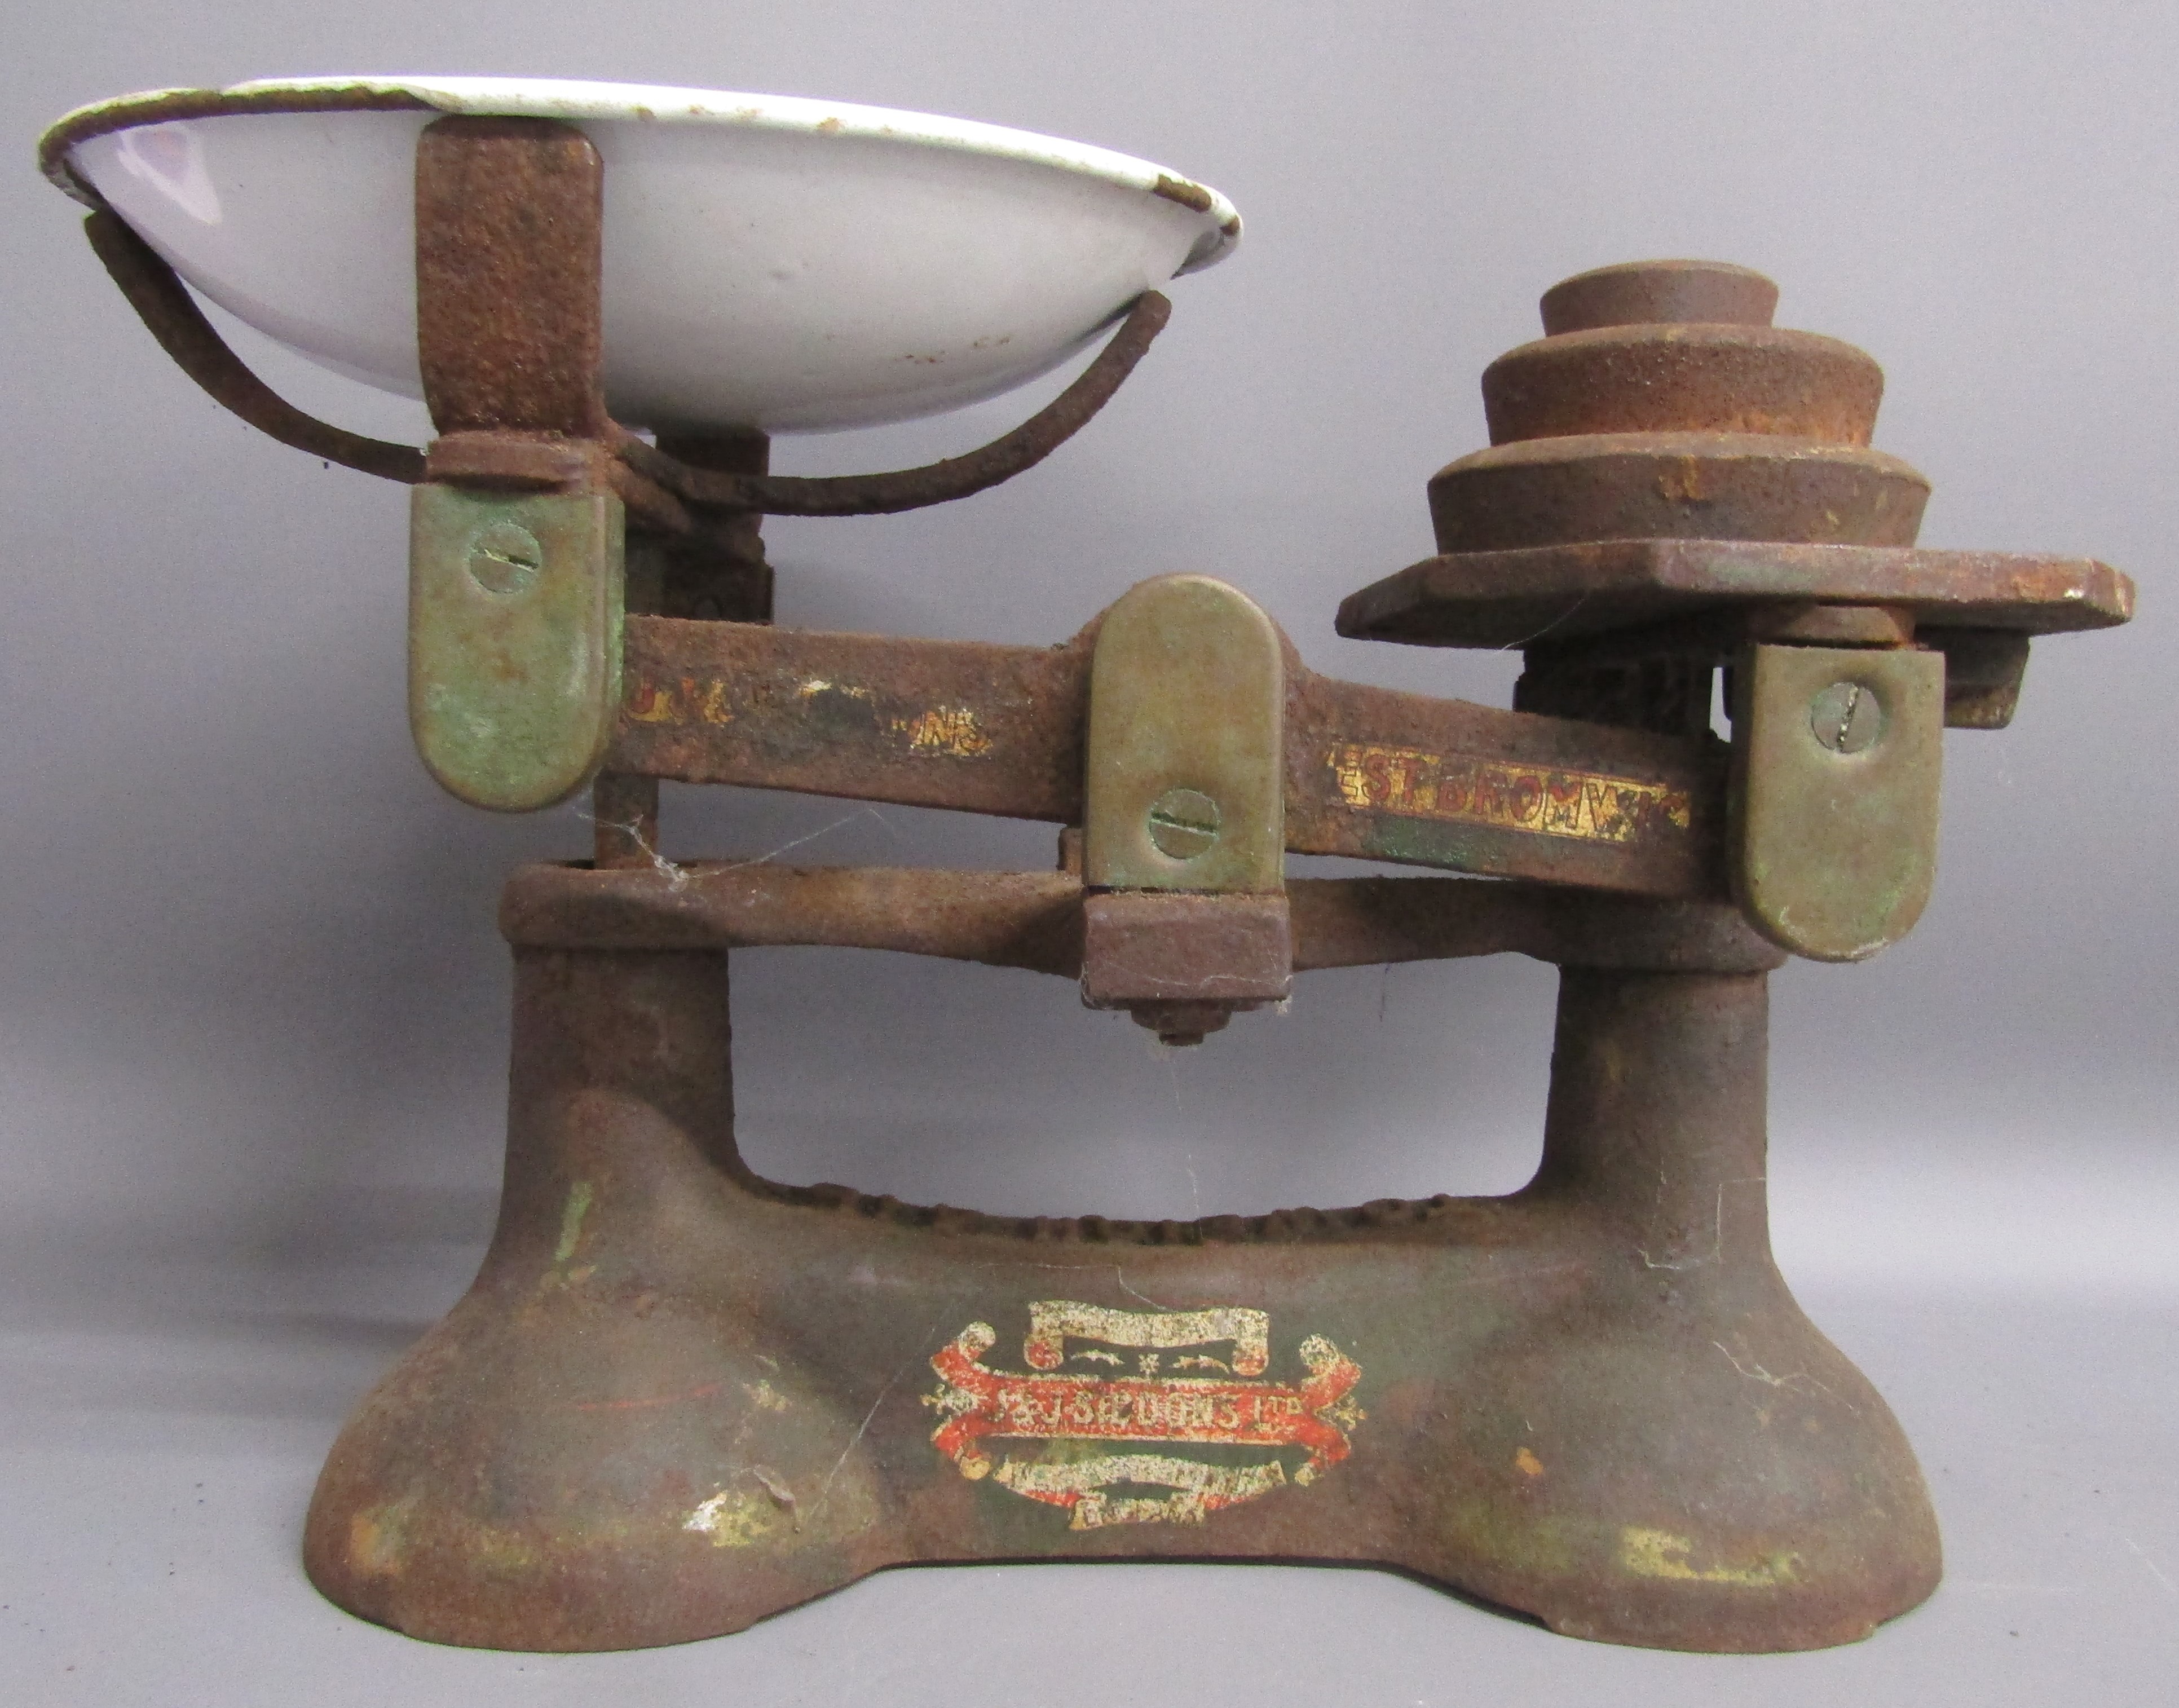 J & J Siddons scales with weights and postal scales with weights - Image 2 of 5